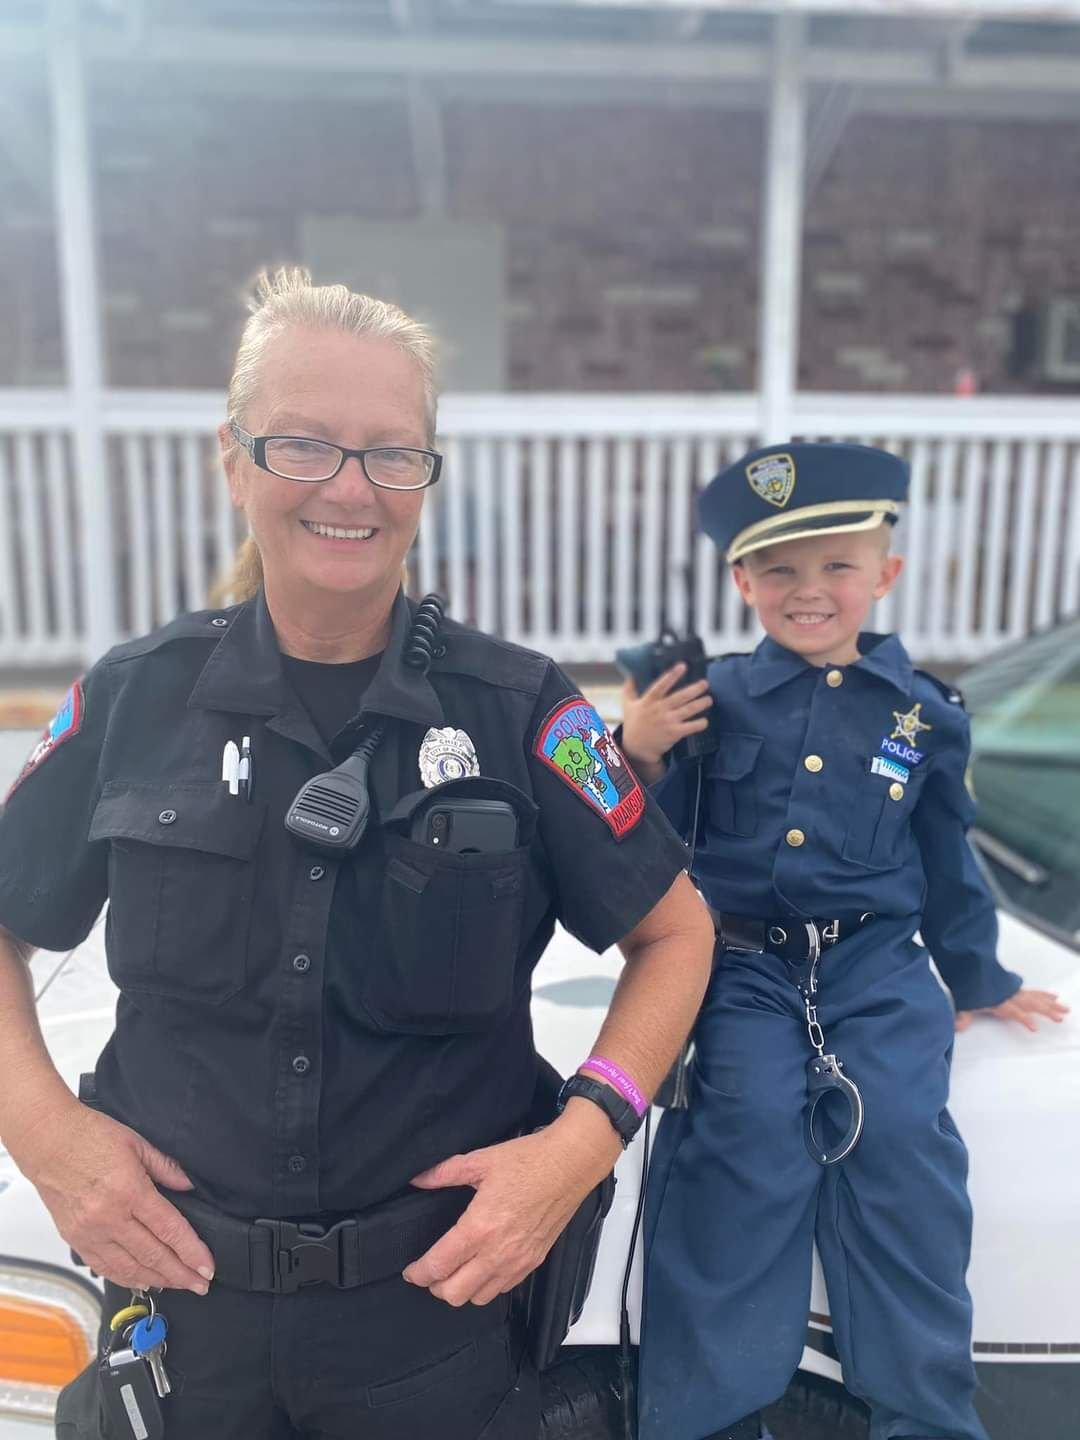 Officer Jo with Officer in Training Crandall.